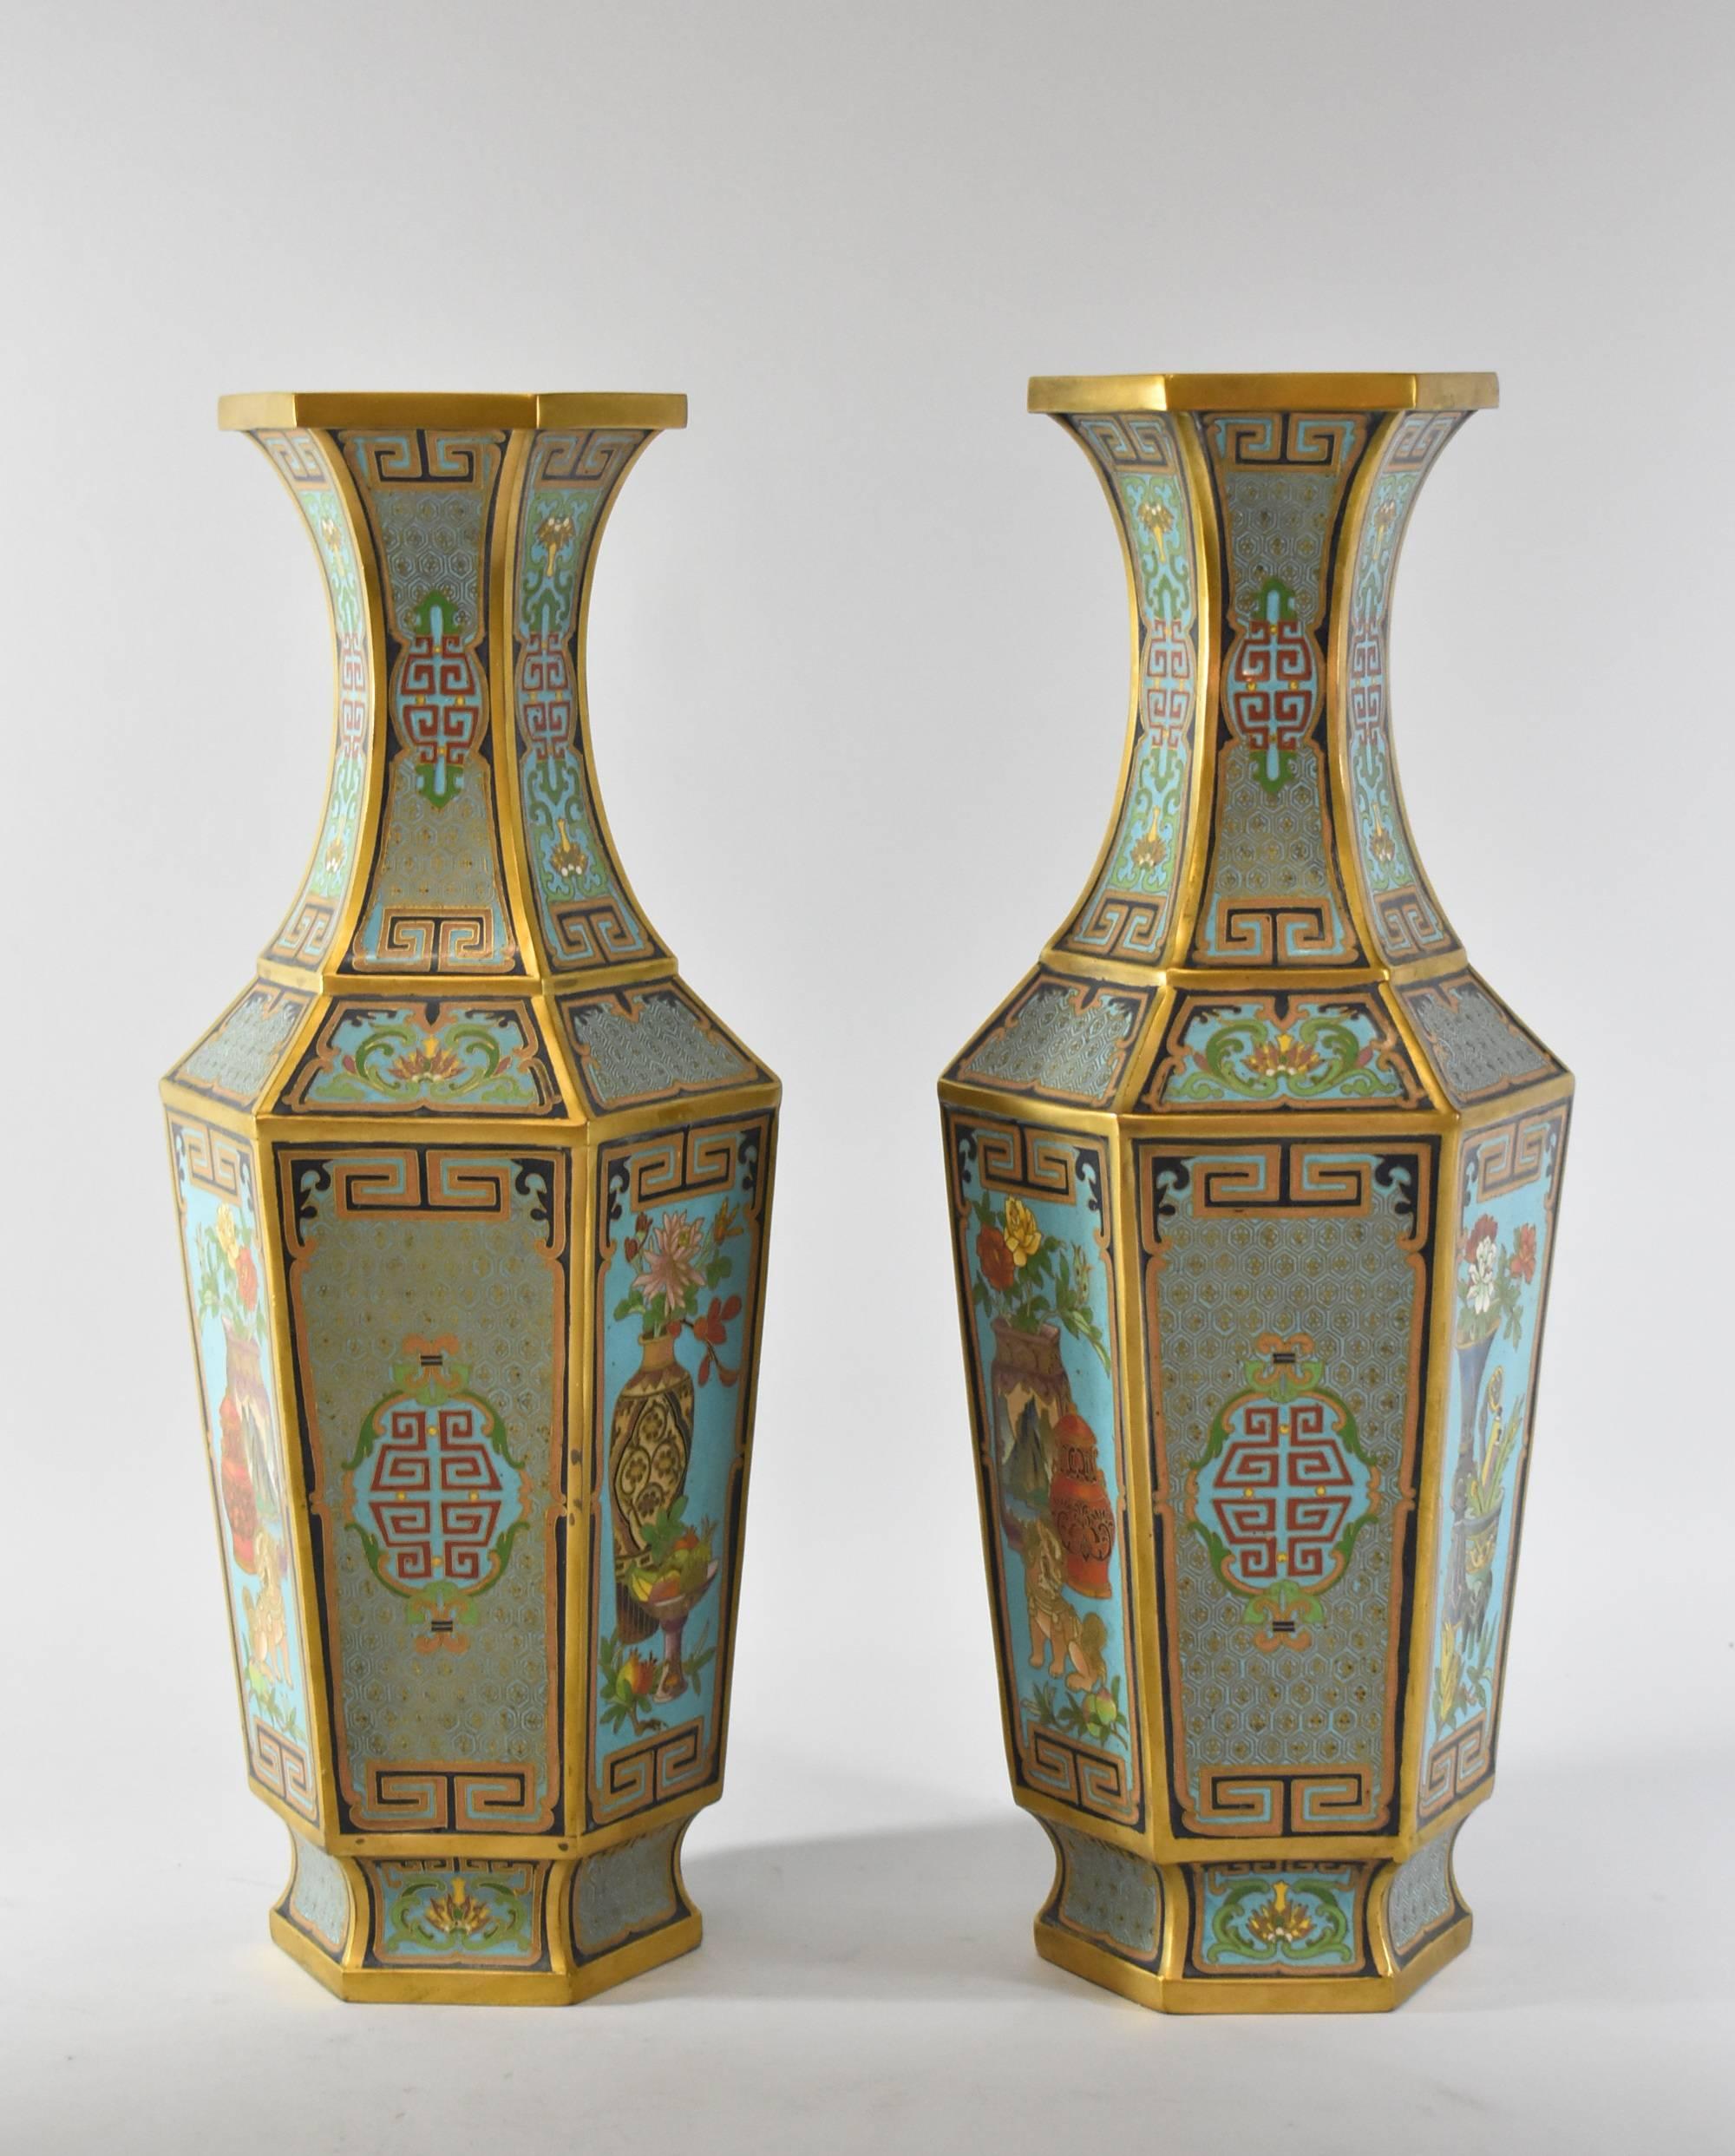 A gorgeous pair of cloisonné Vases. These stunning vases feature temple dog images, floral designs and fruit baskets in brilliant colors. They are six-sided, hexagon shaped, with a turquoise interior and bottom. They are marked #21 on the bottom.